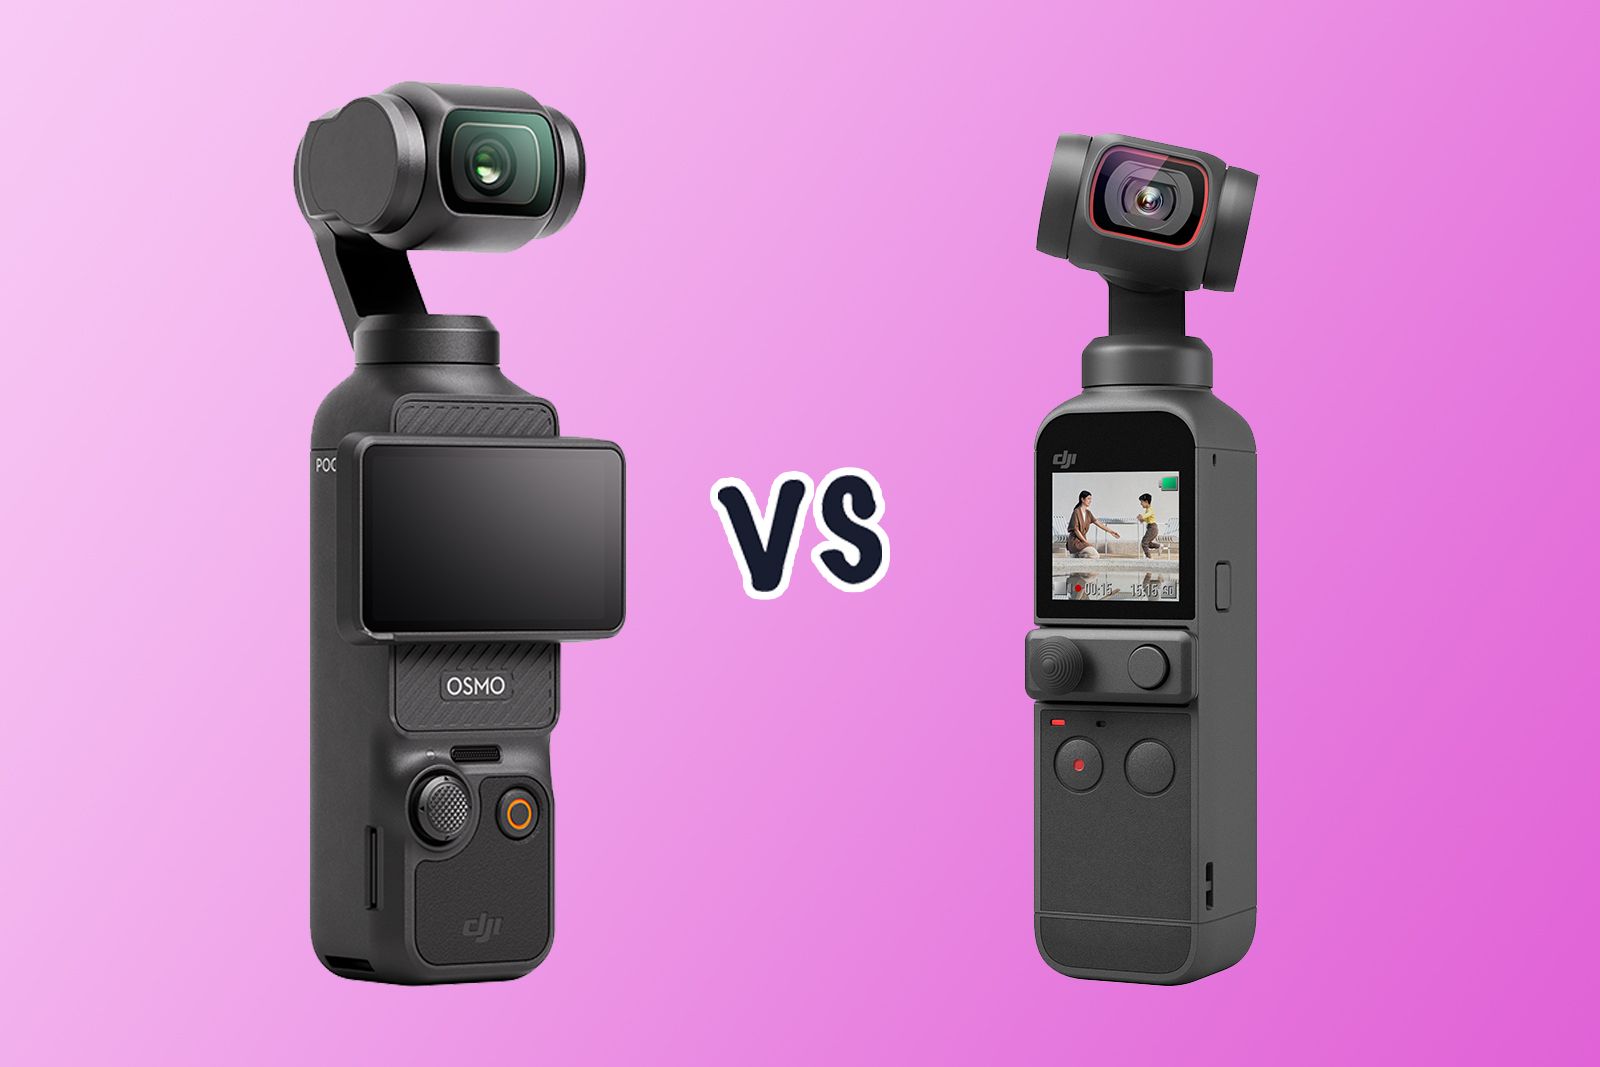 DJI Takes Osmo Pocket to New Levels with Osmo Pocket 3 and Accessories